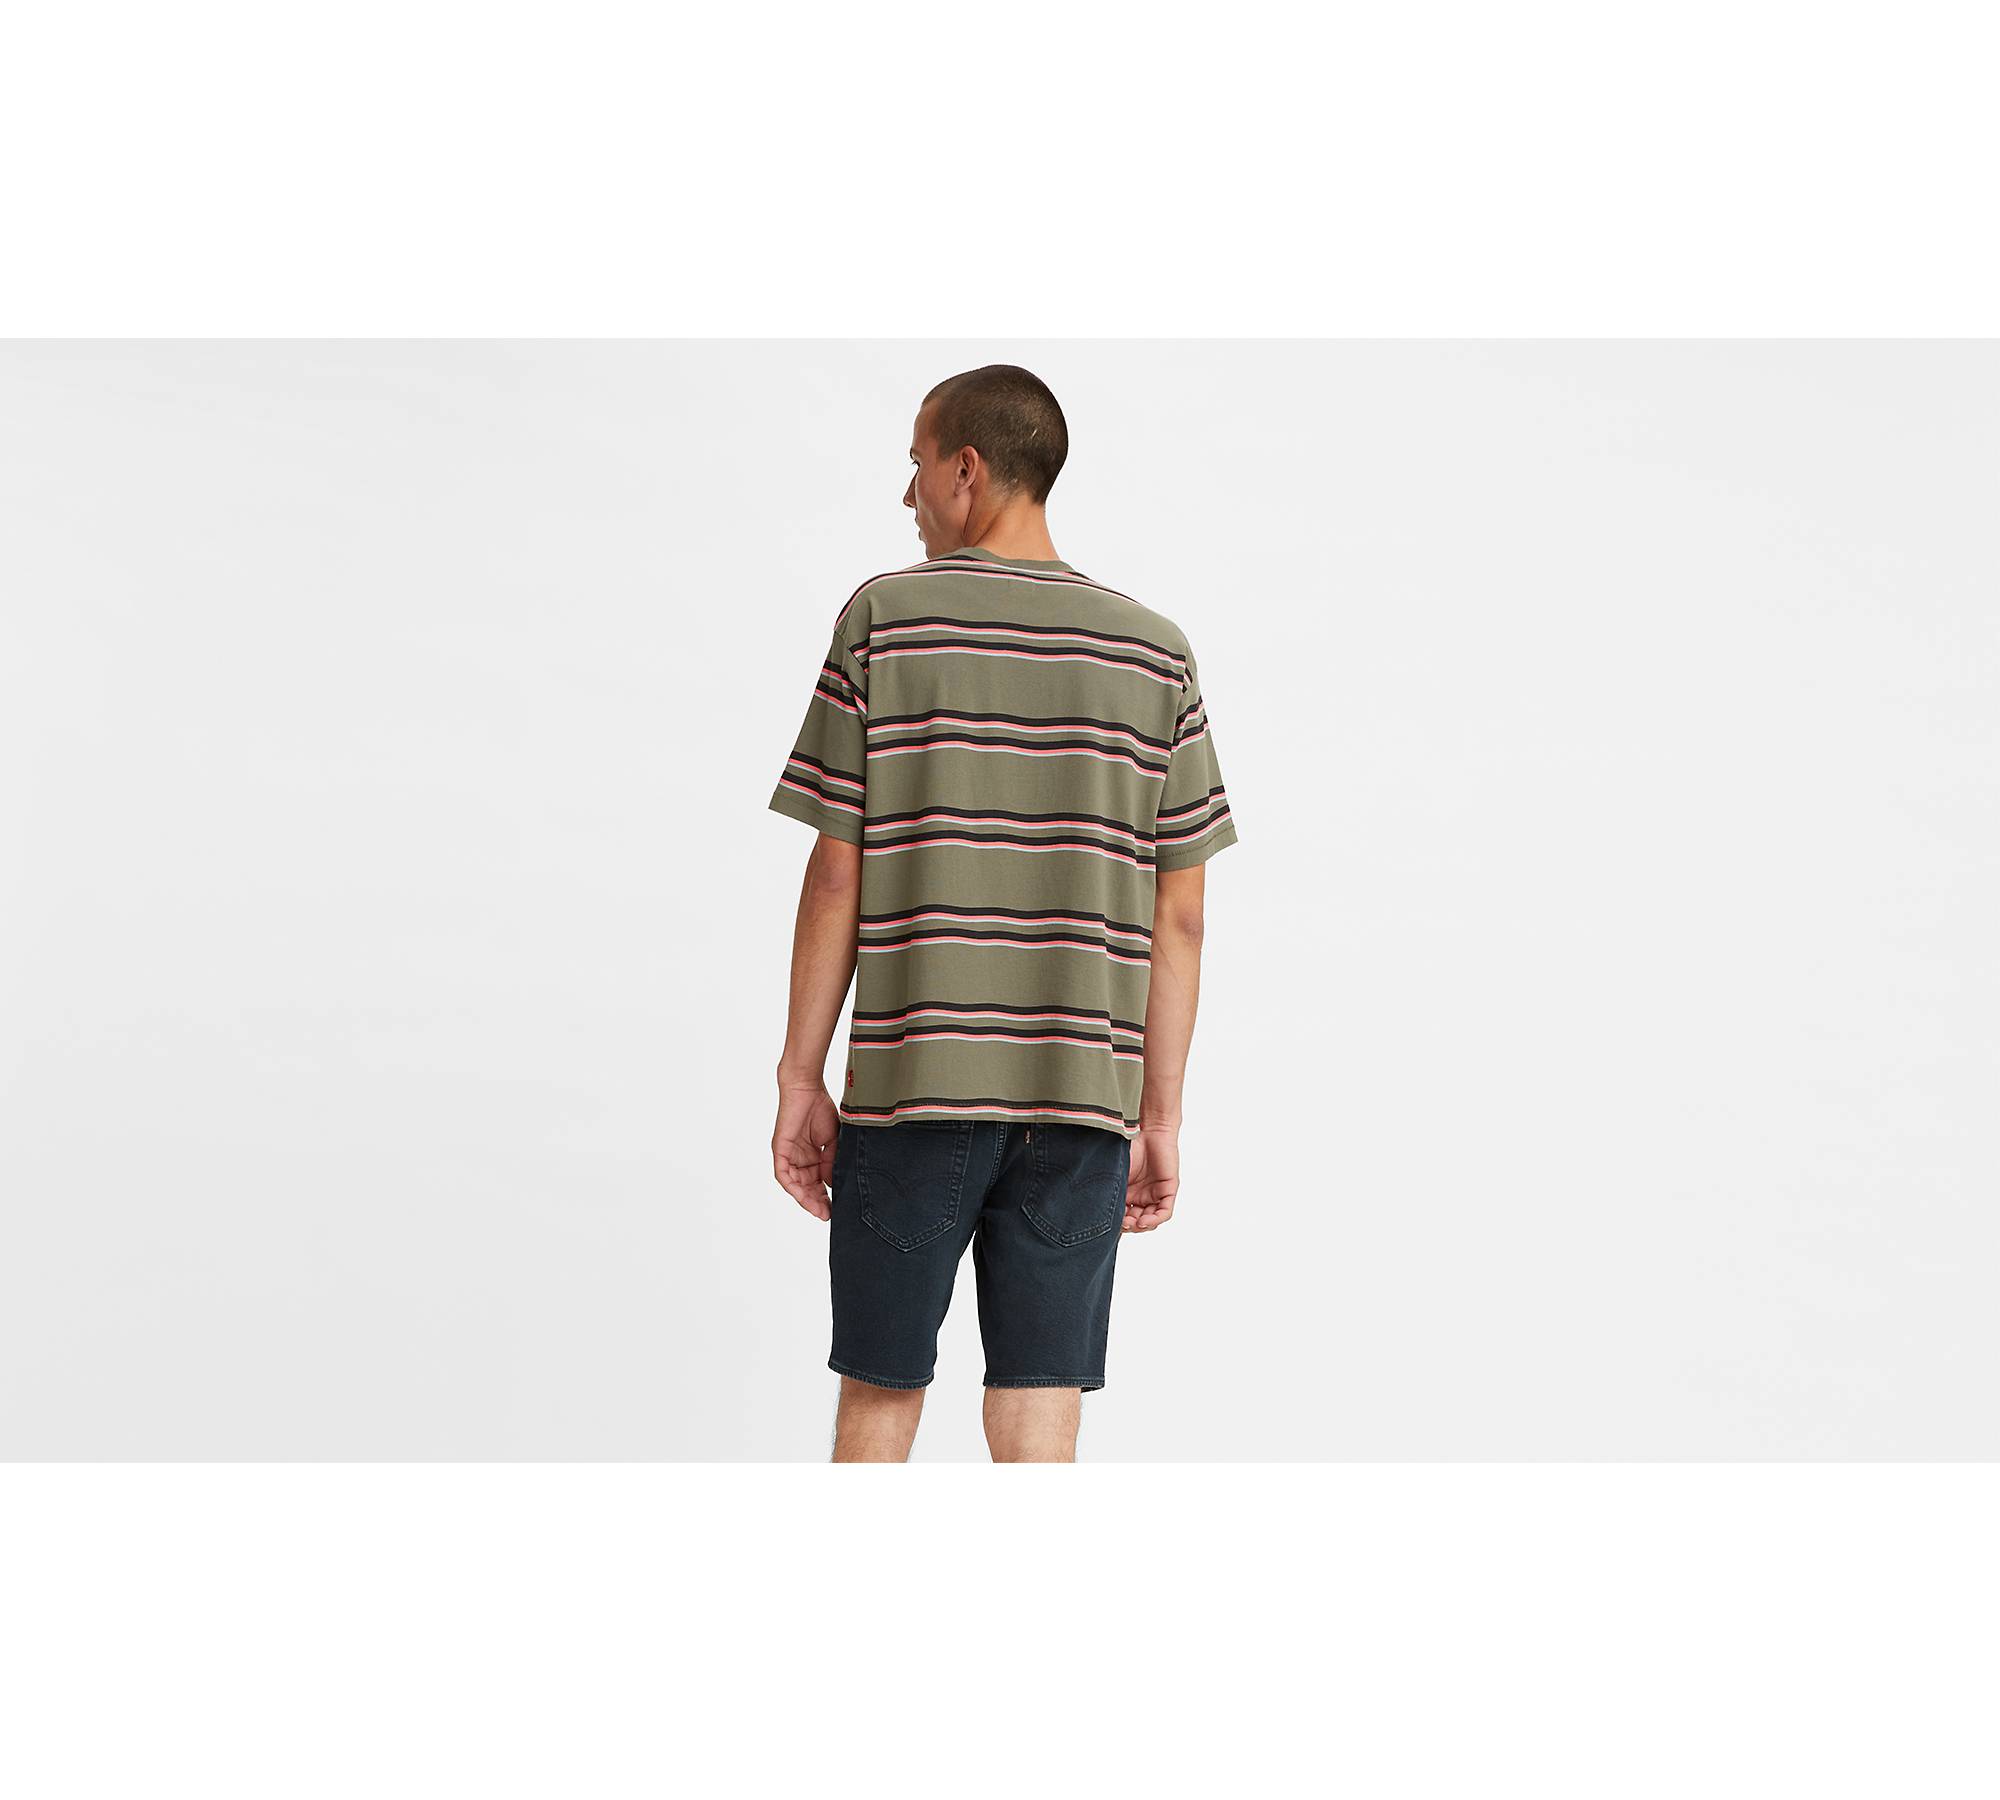 Vintage Red Tab™ T-shirt - Green | Levi's® US